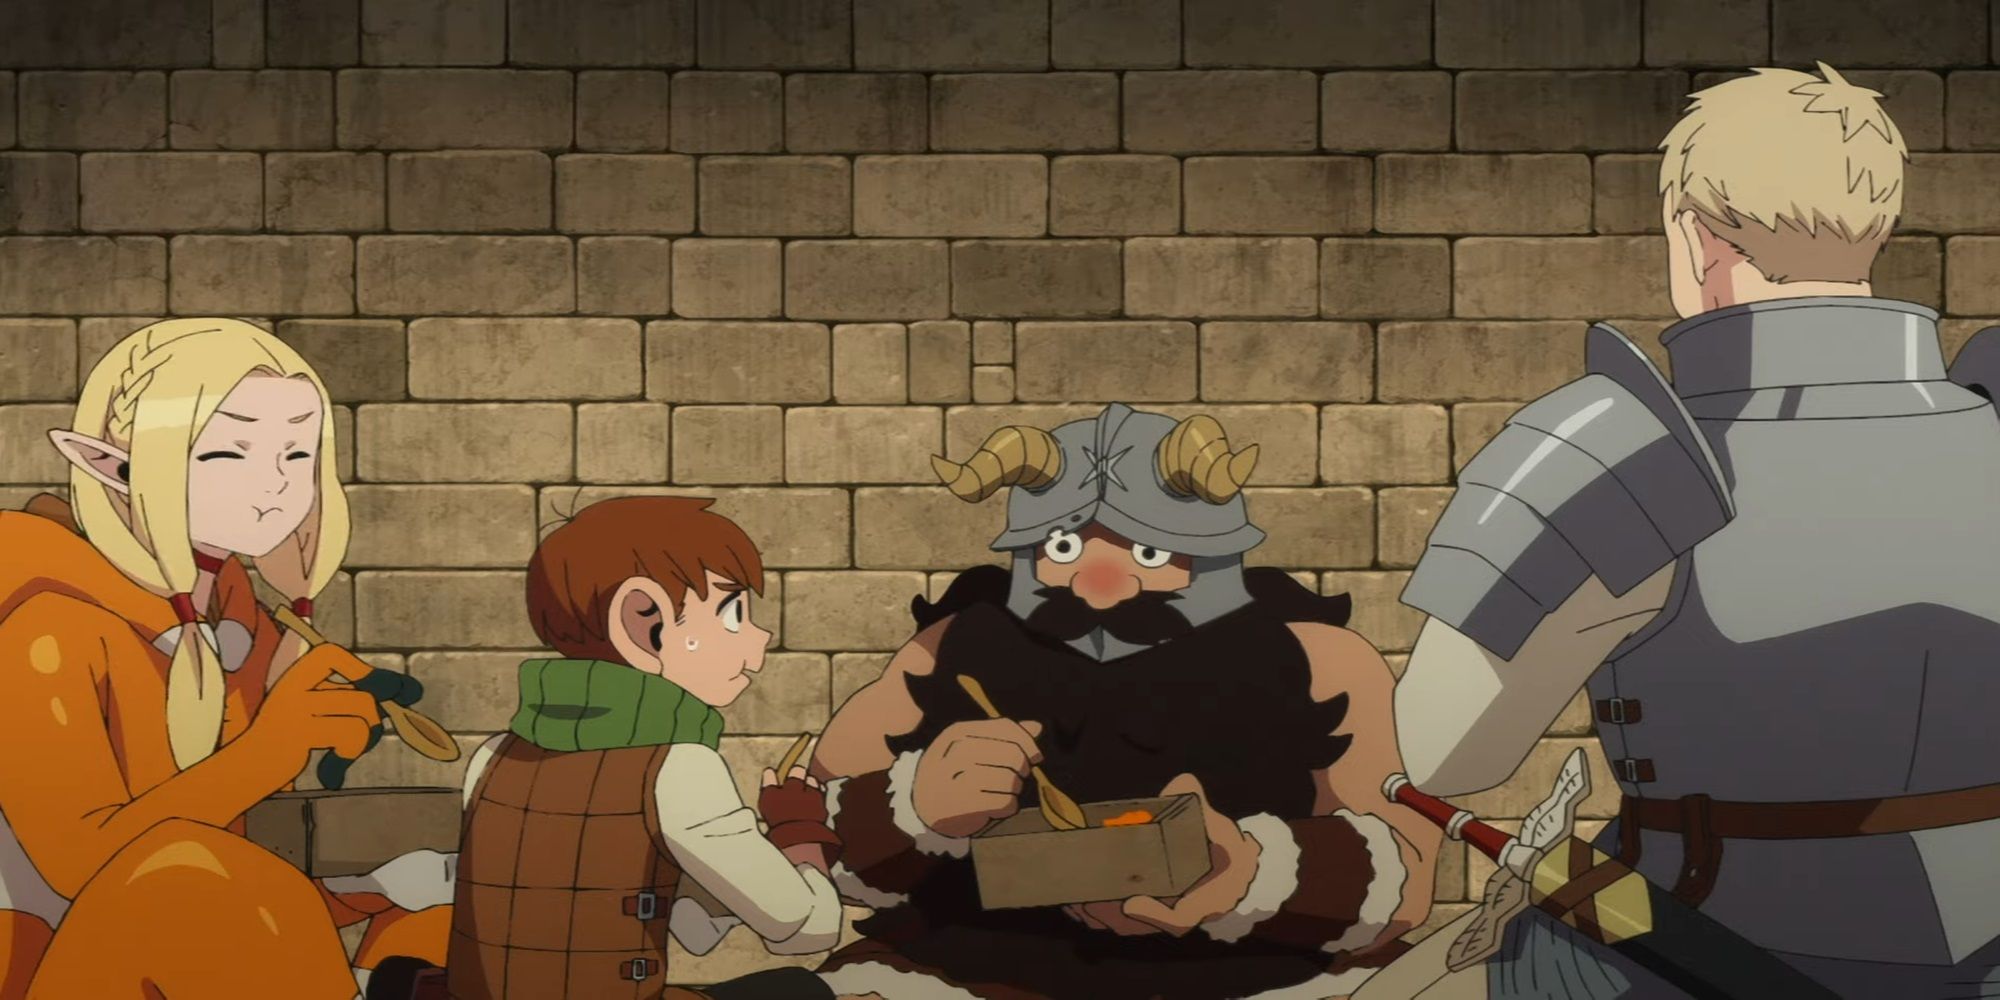 Delicious In Dungeon Trailer featuring the Touden Party eating together inside the dungeon.